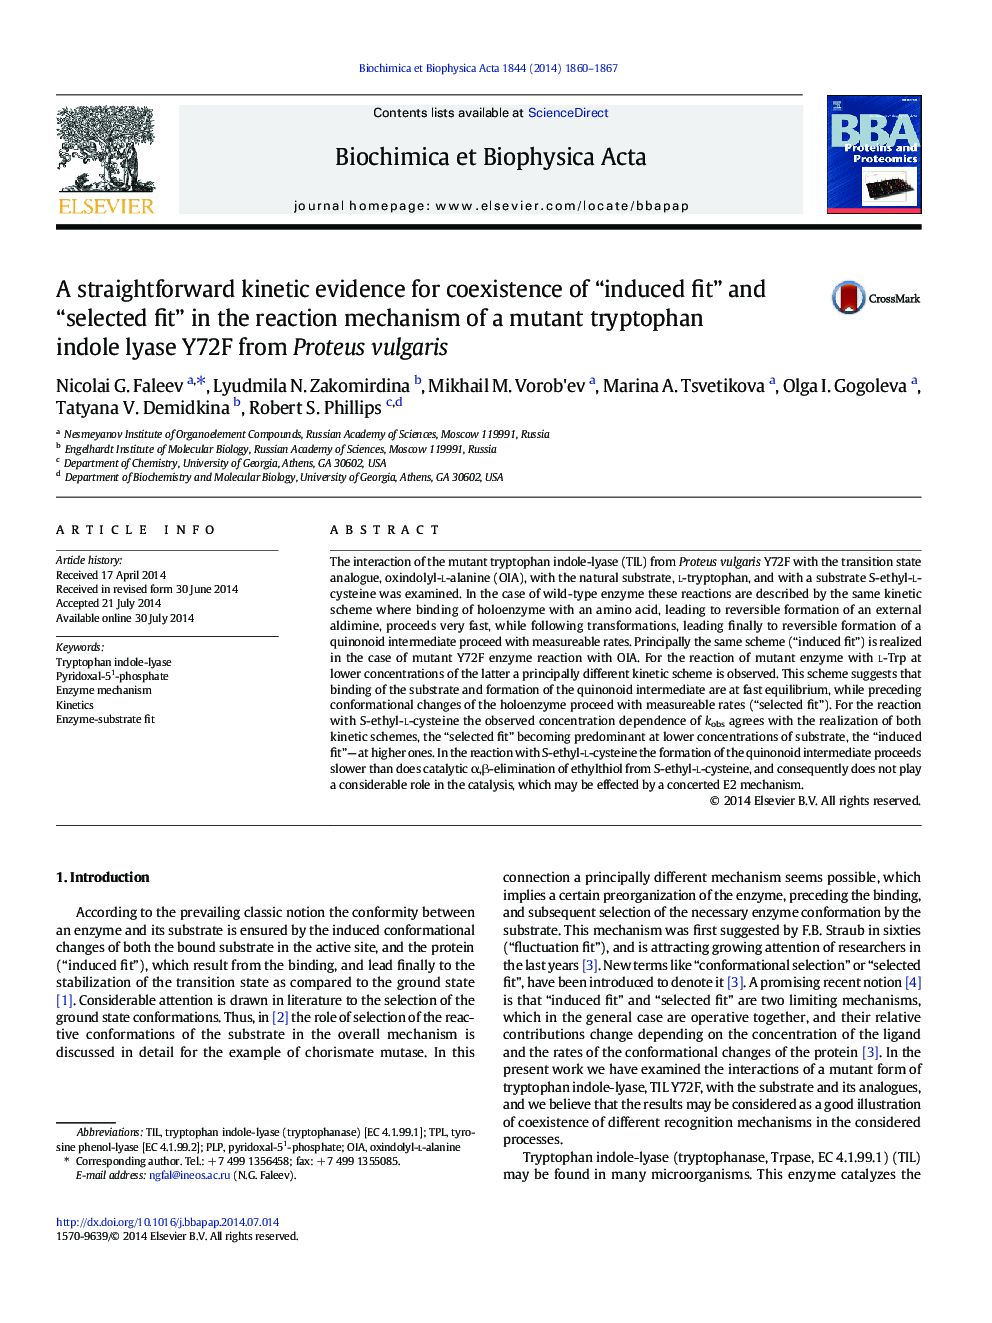 A straightforward kinetic evidence for coexistence of “induced fit” and “selected fit” in the reaction mechanism of a mutant tryptophan indole lyase Y72F from Proteus vulgaris